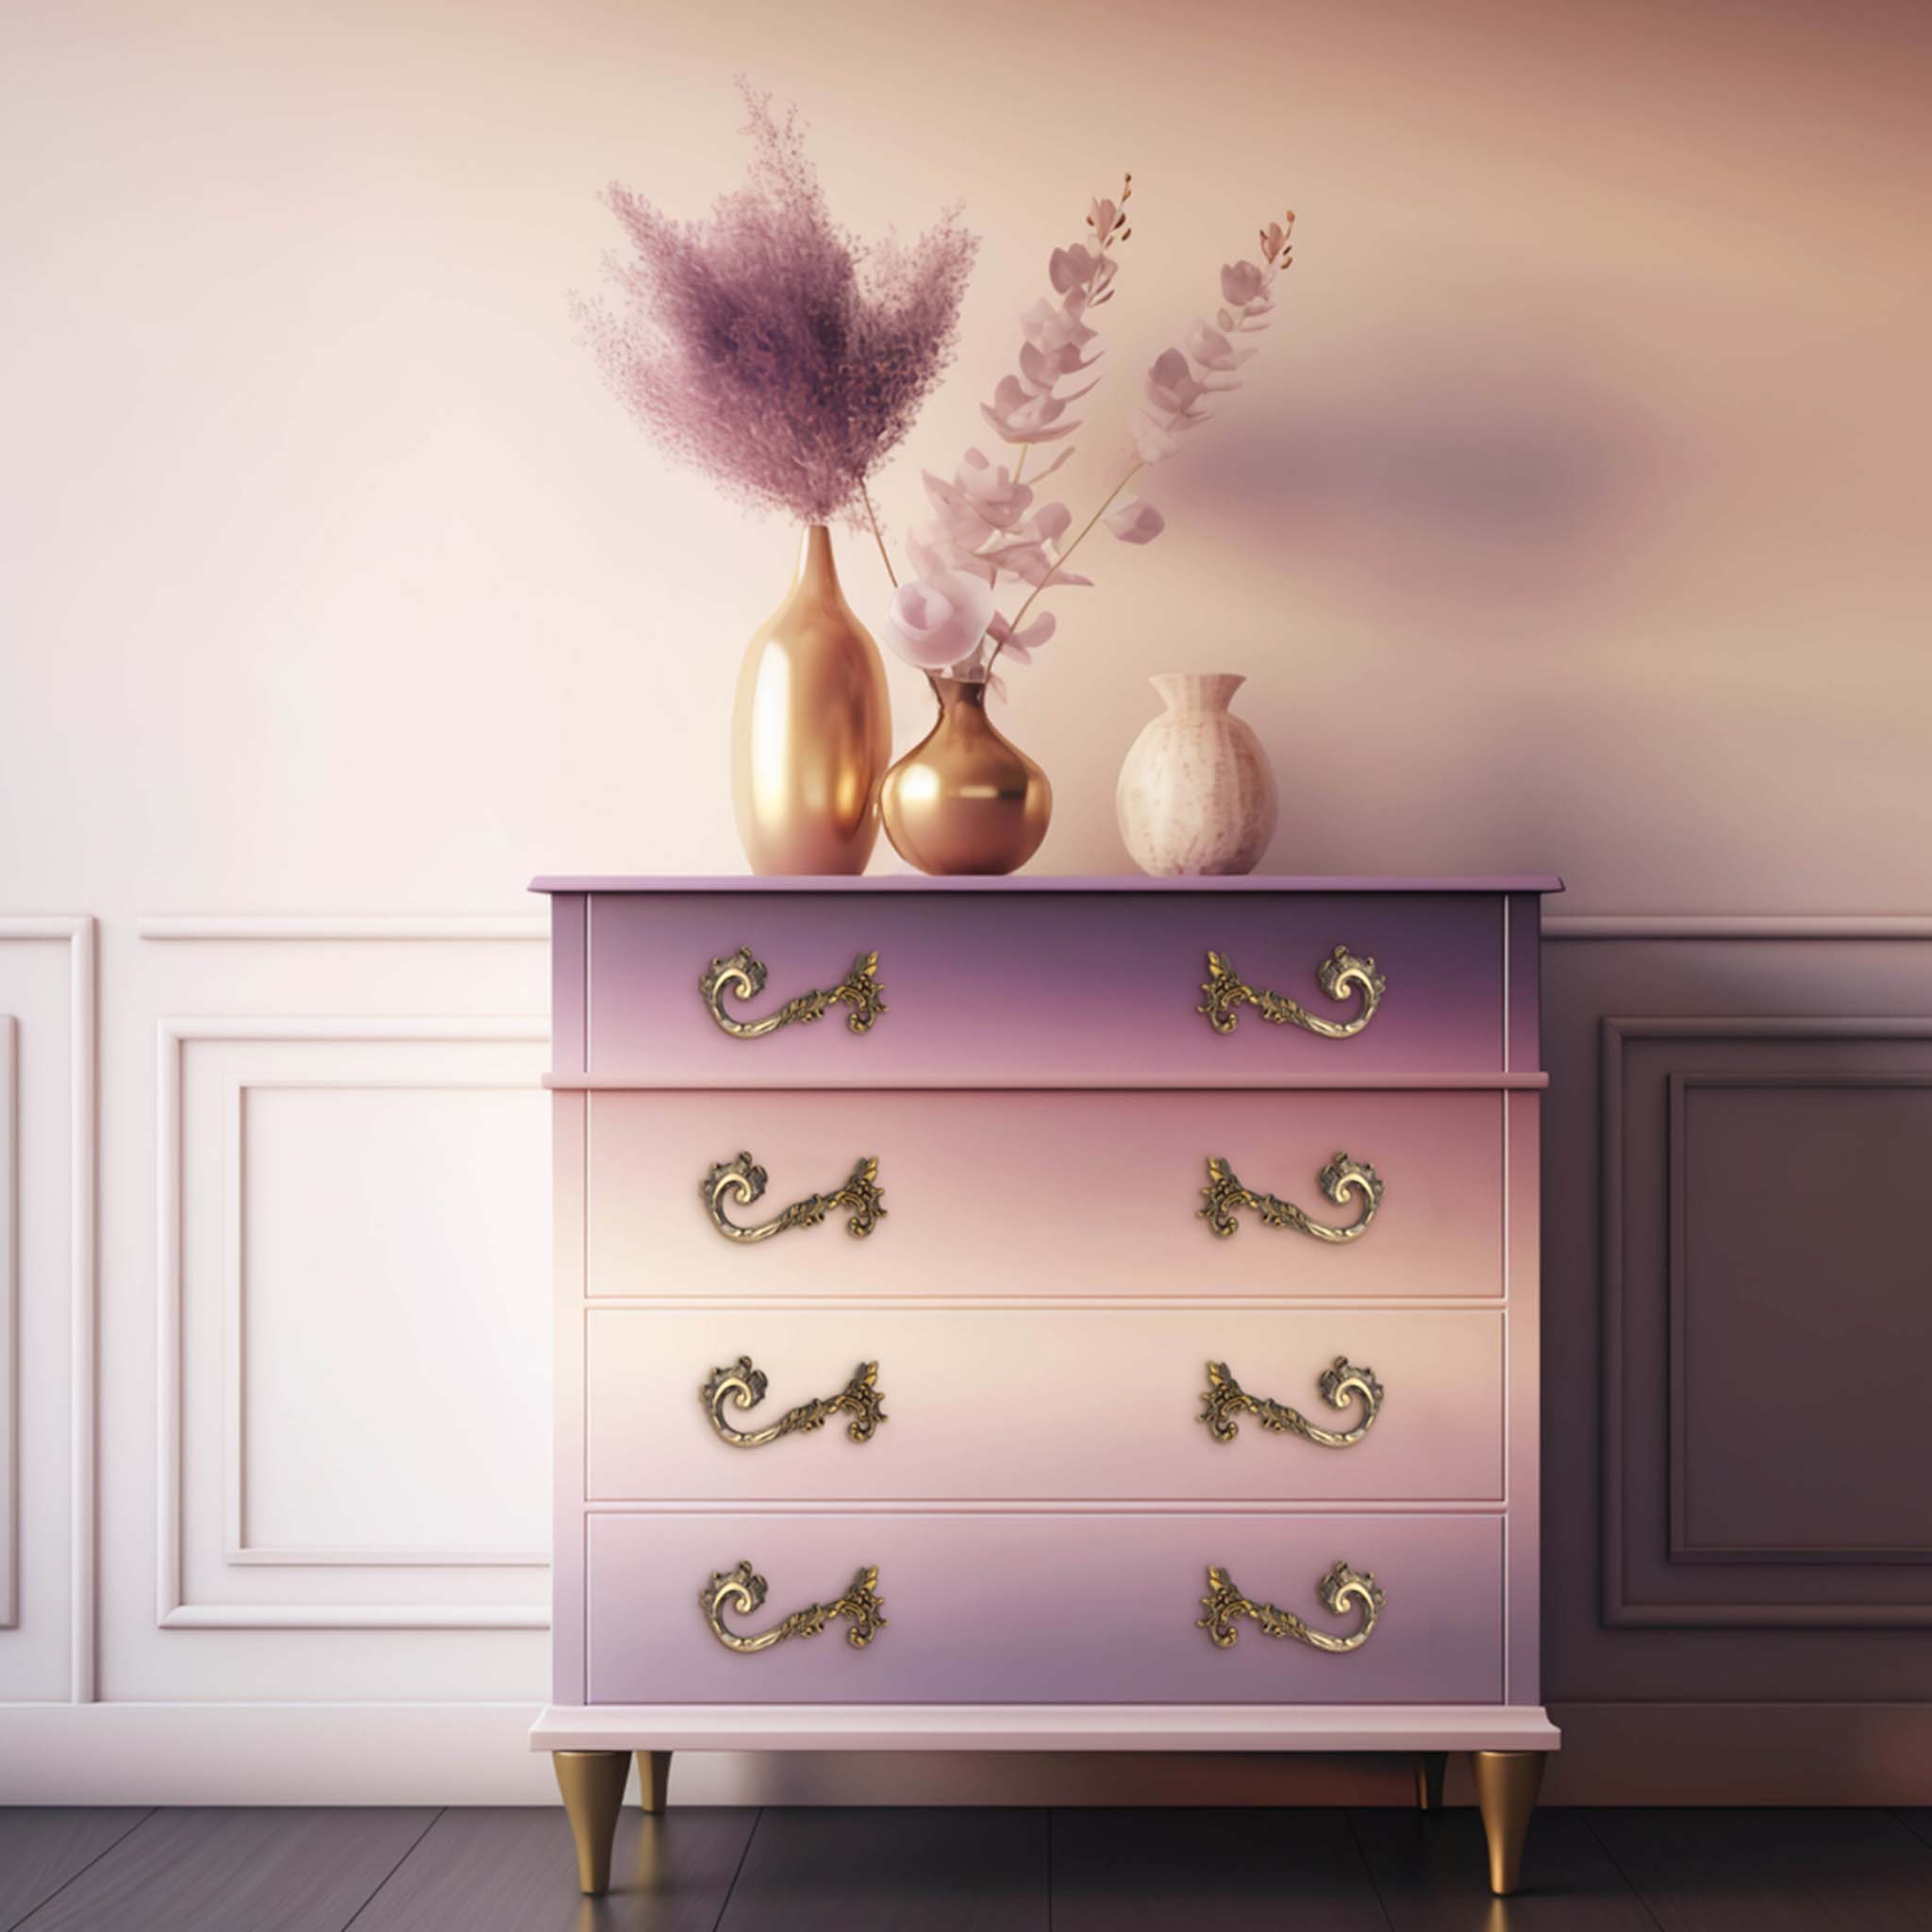 A 4-drawer dresser is painted an ombre of light purple and pinks and features ReDesign with Prima's Enchante metal drawer pulls by Kacha.